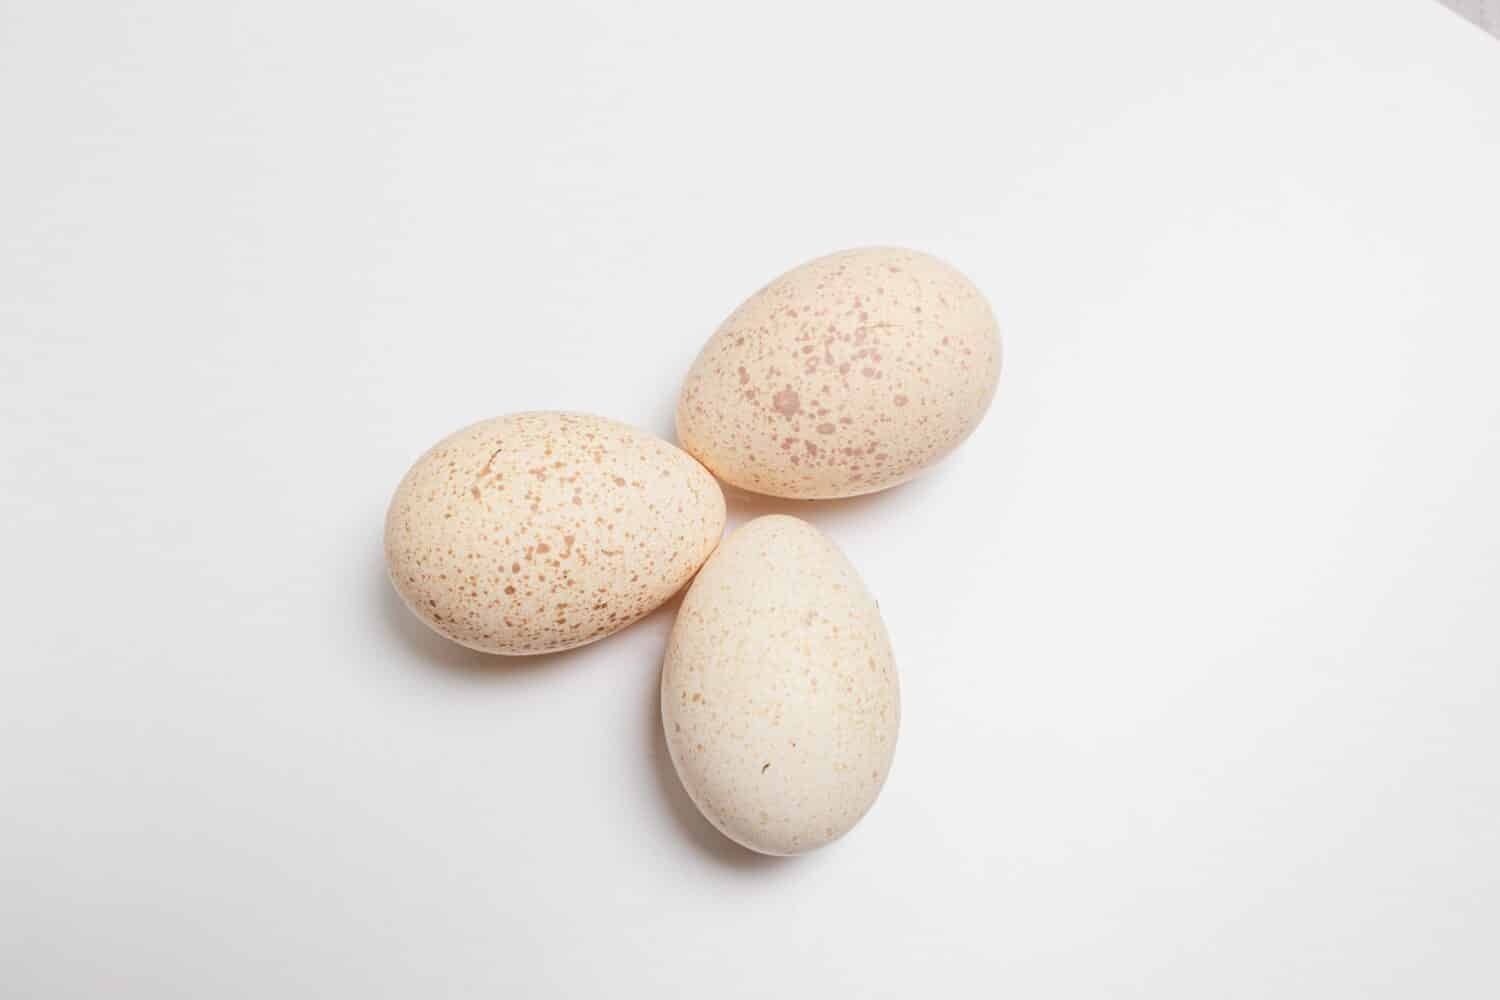 Fresh Turkey Eggs on a white background Large speckled eggs